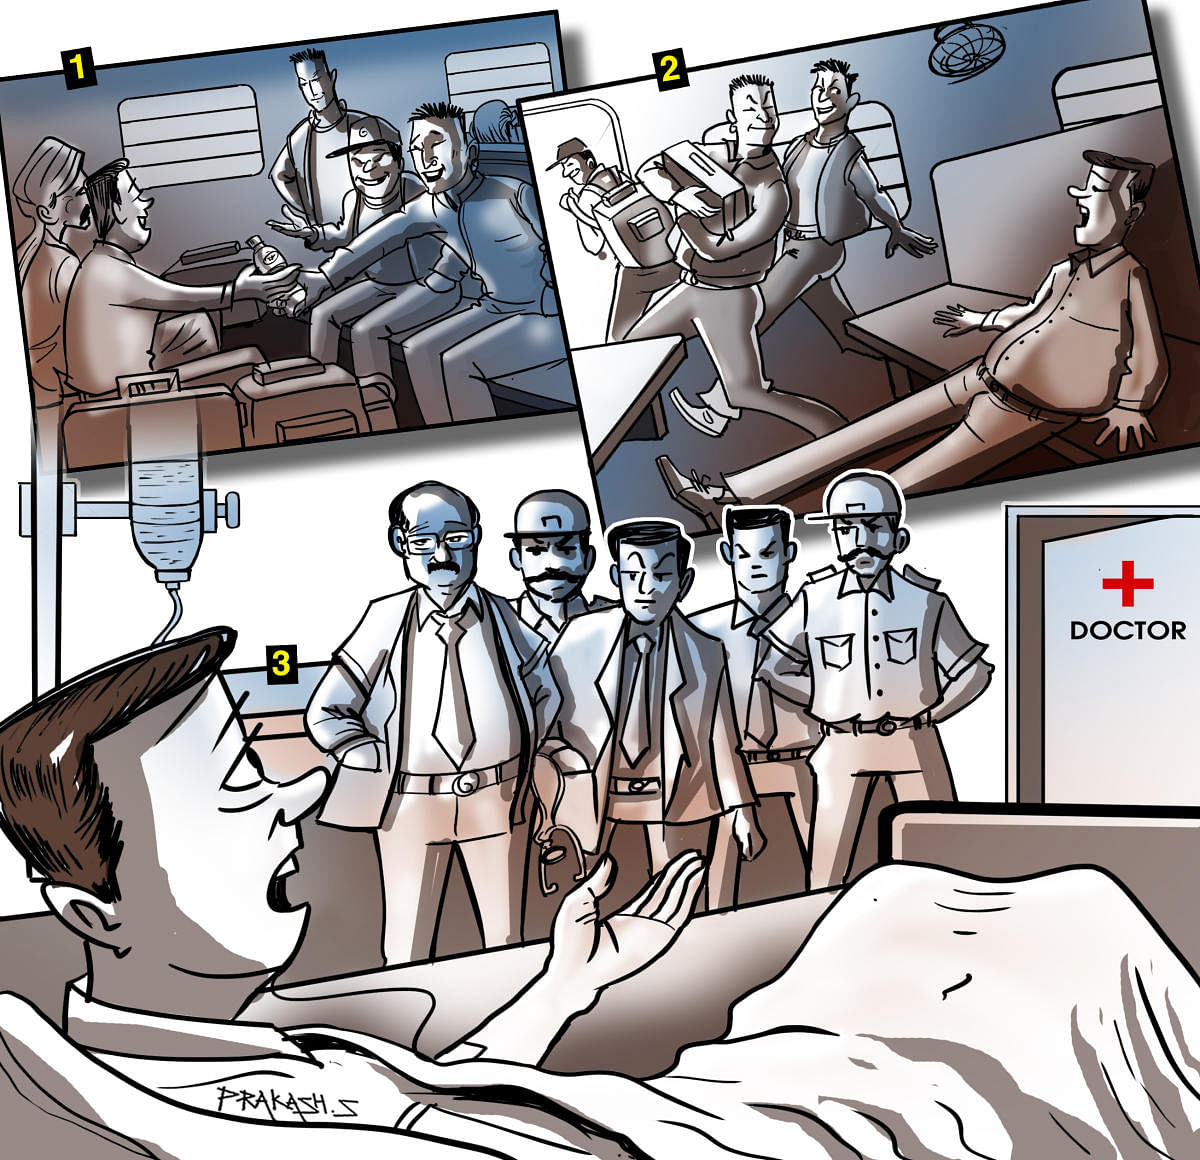 1. Gang of six offered sedative-laced juice in plastic cups to passengers on the KSR Bengaluru-New Delhi Karnataka Express. 2. The juice made the victims sleep for 25 hours at a stretch. The gang would then flee with all their valuables. 3. The passengers were so drowsy that they had to be hospitalised. DH Illustration/Prakash S